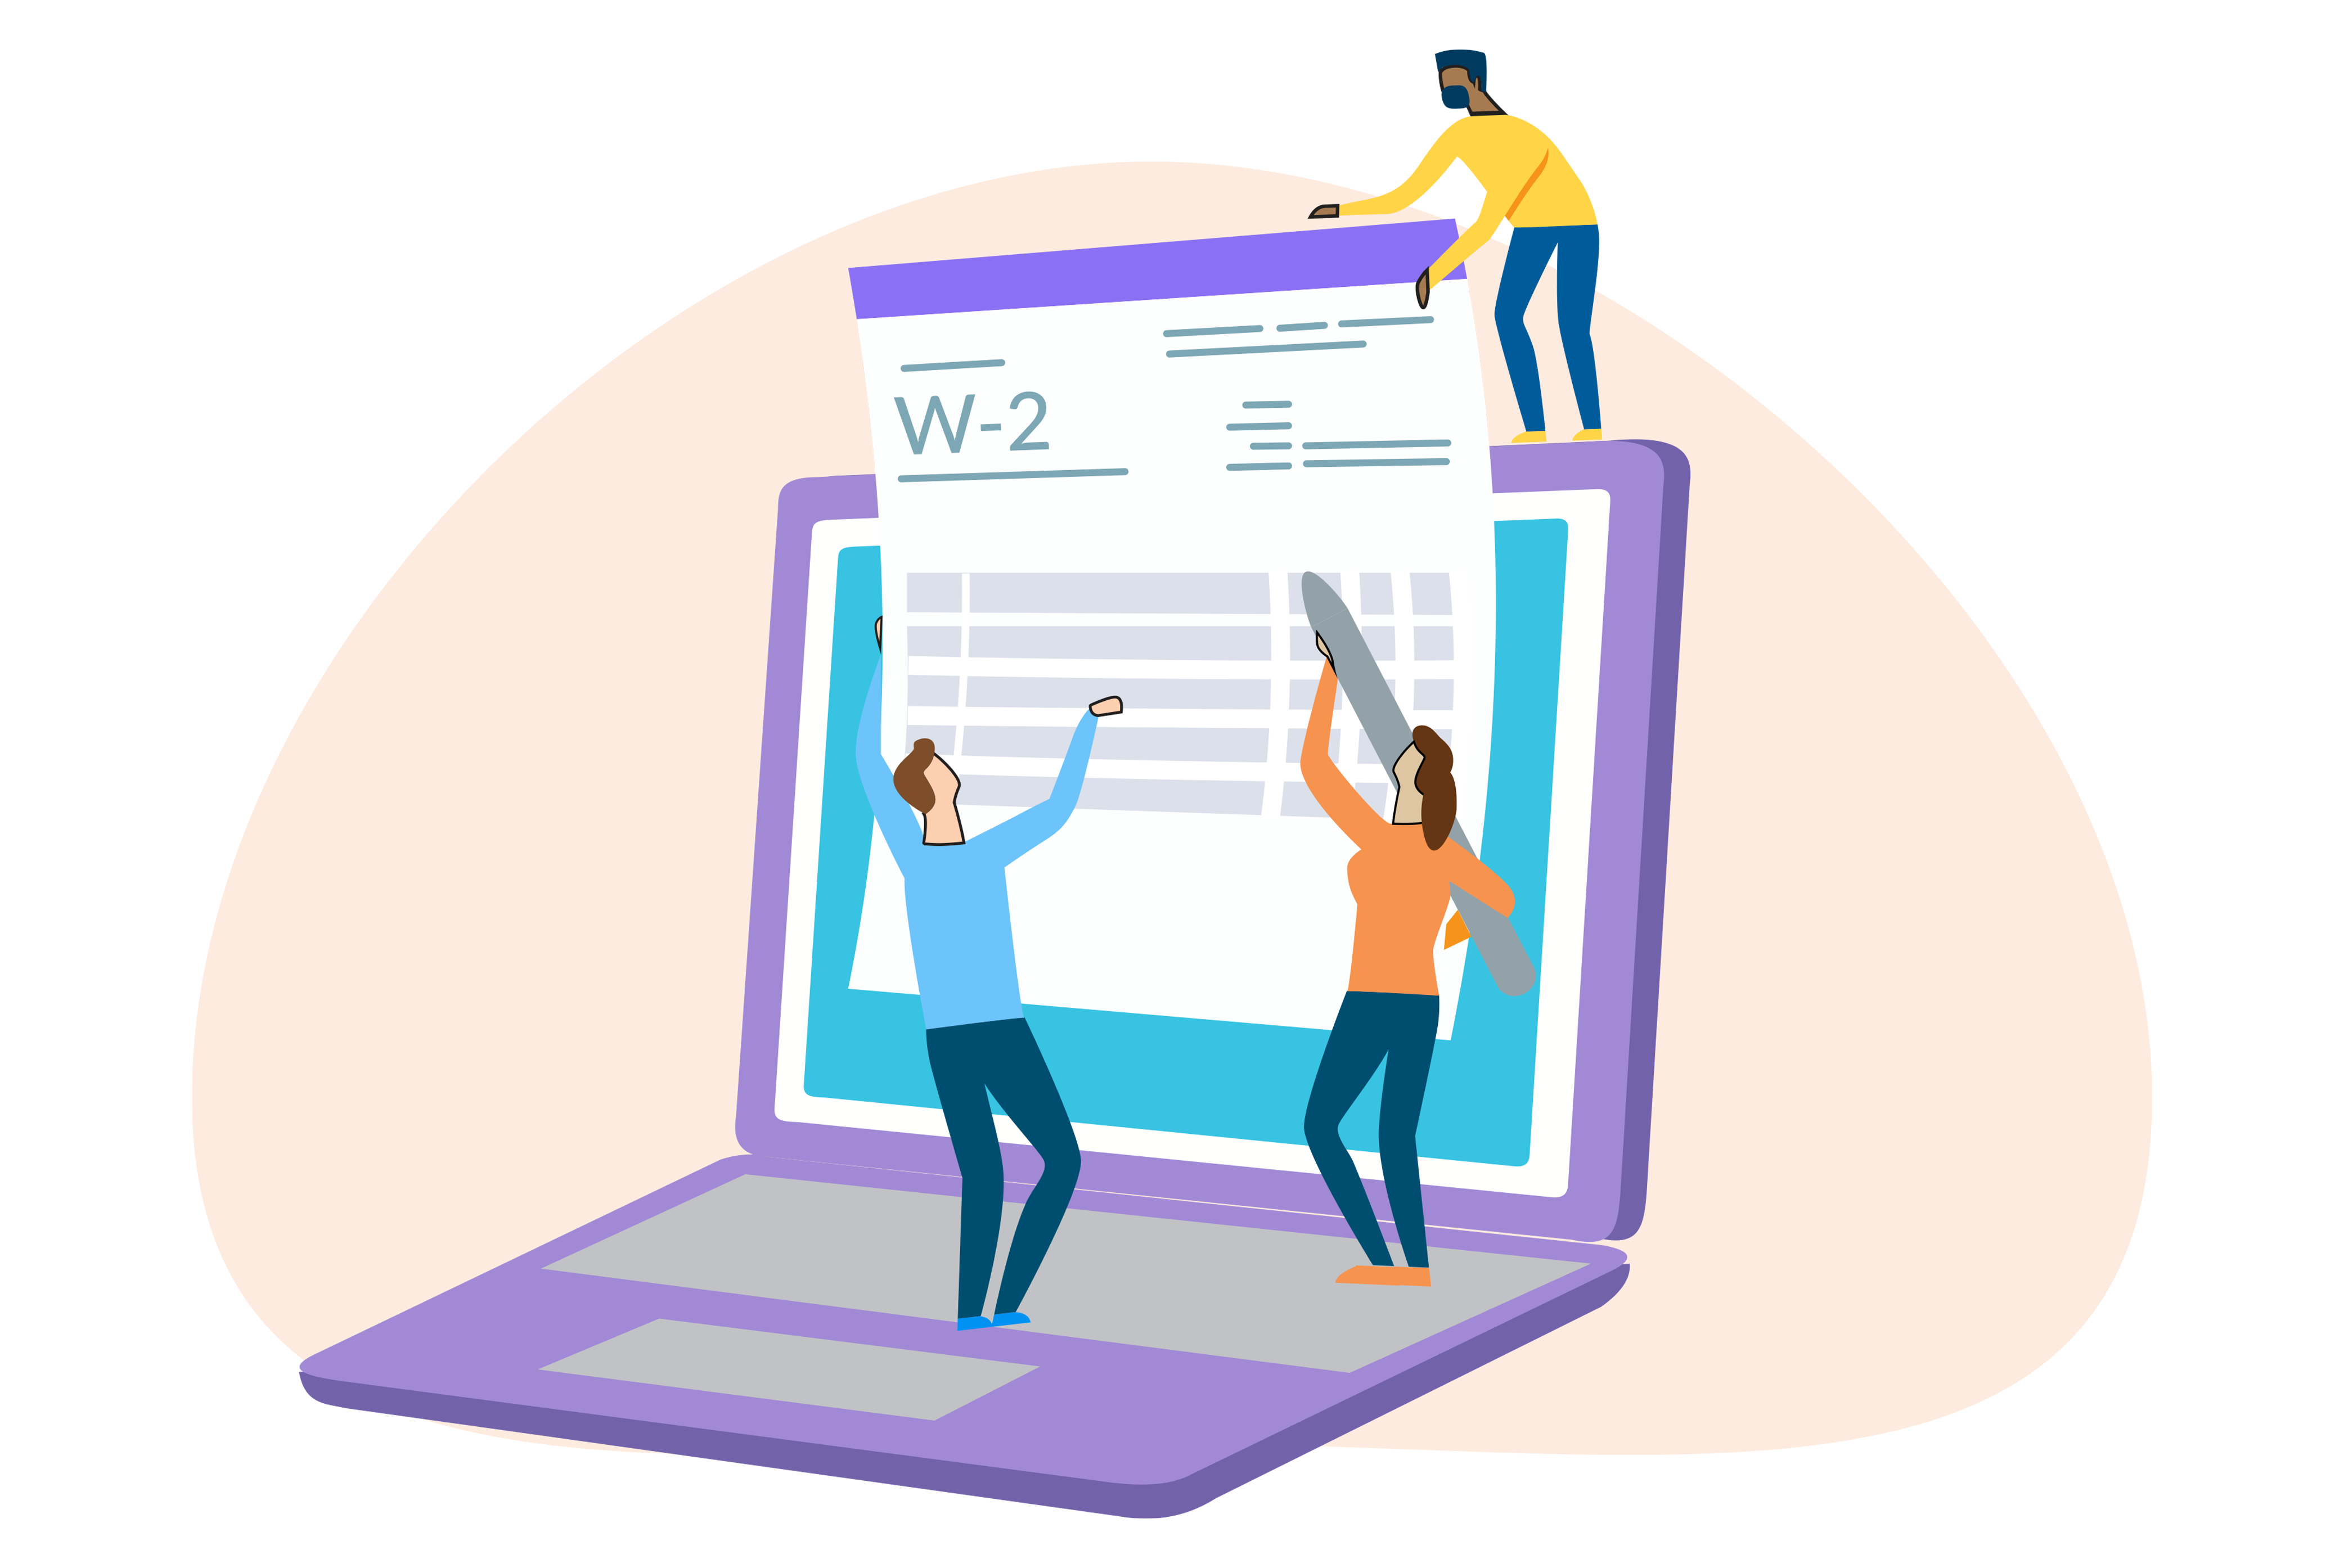 How To Get Copies Of Your Old W-2 Forms | Joblist in How To Get Your Old W2 Forms